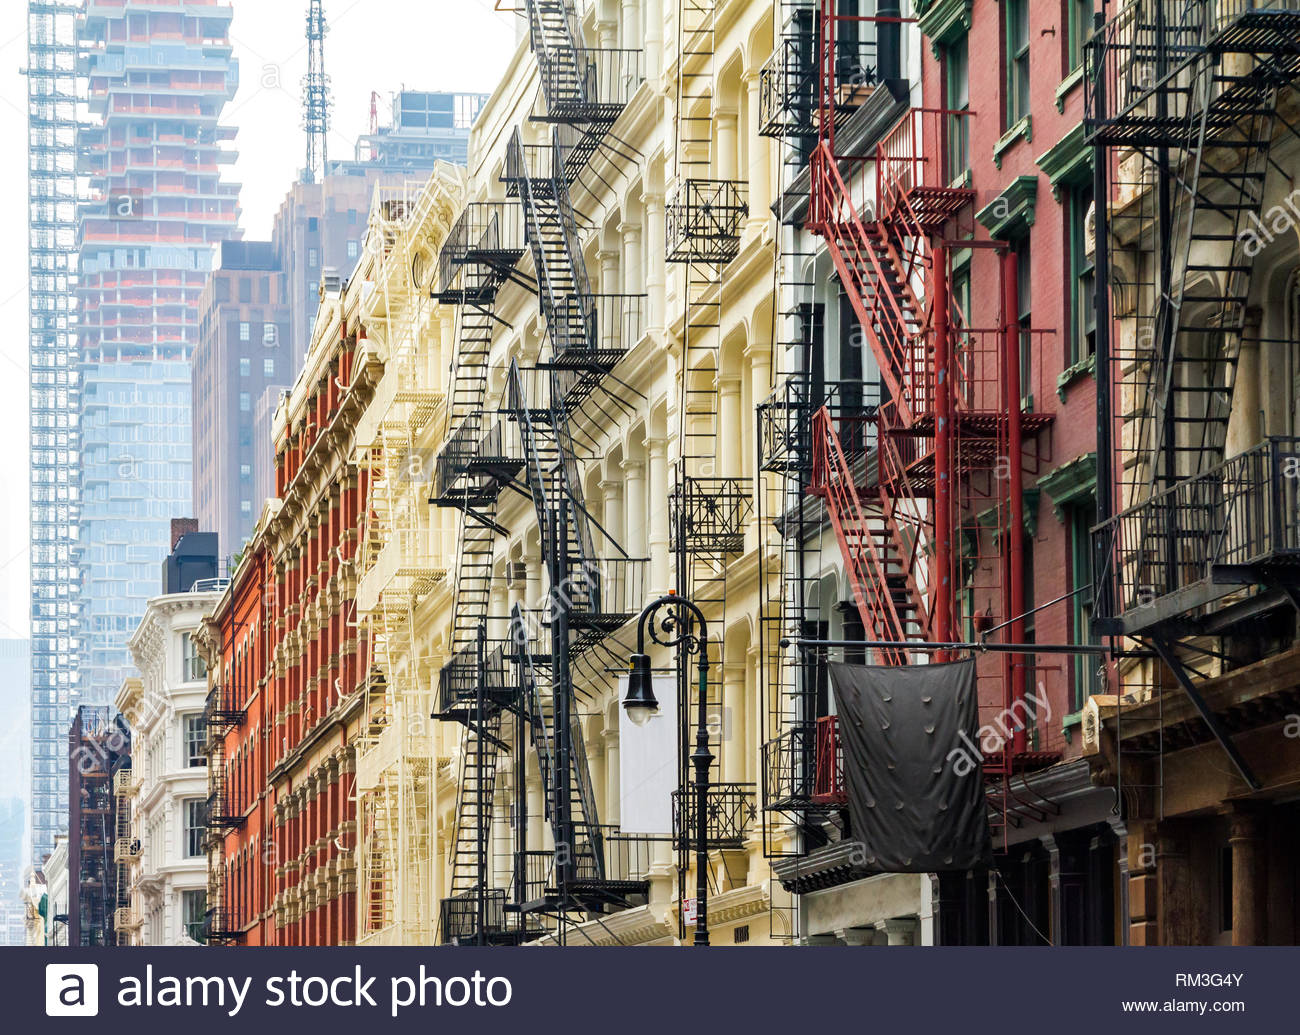 Free download Old historic buildings along Greene Street in SoHo ...